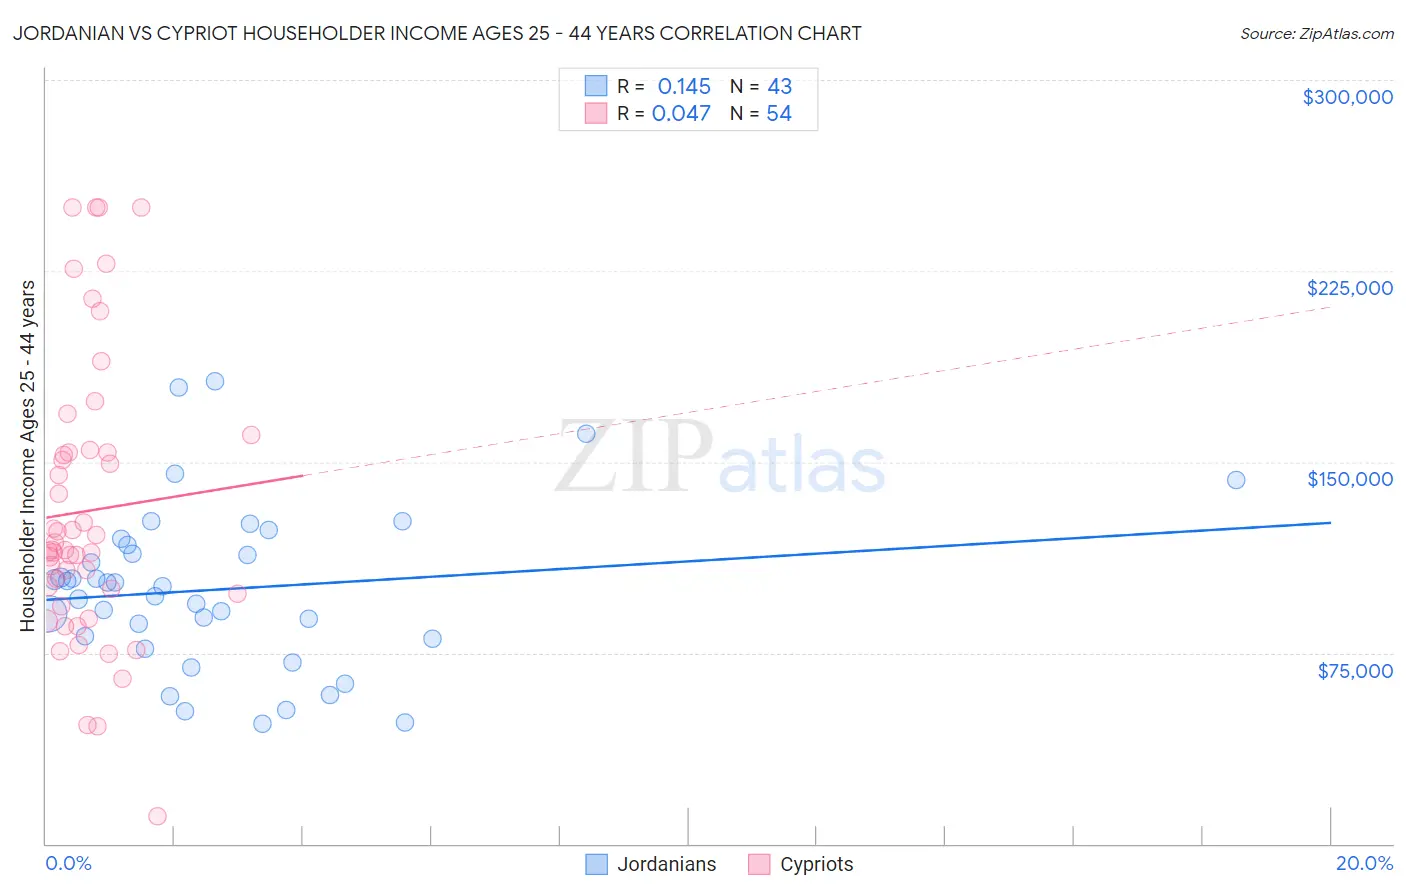 Jordanian vs Cypriot Householder Income Ages 25 - 44 years